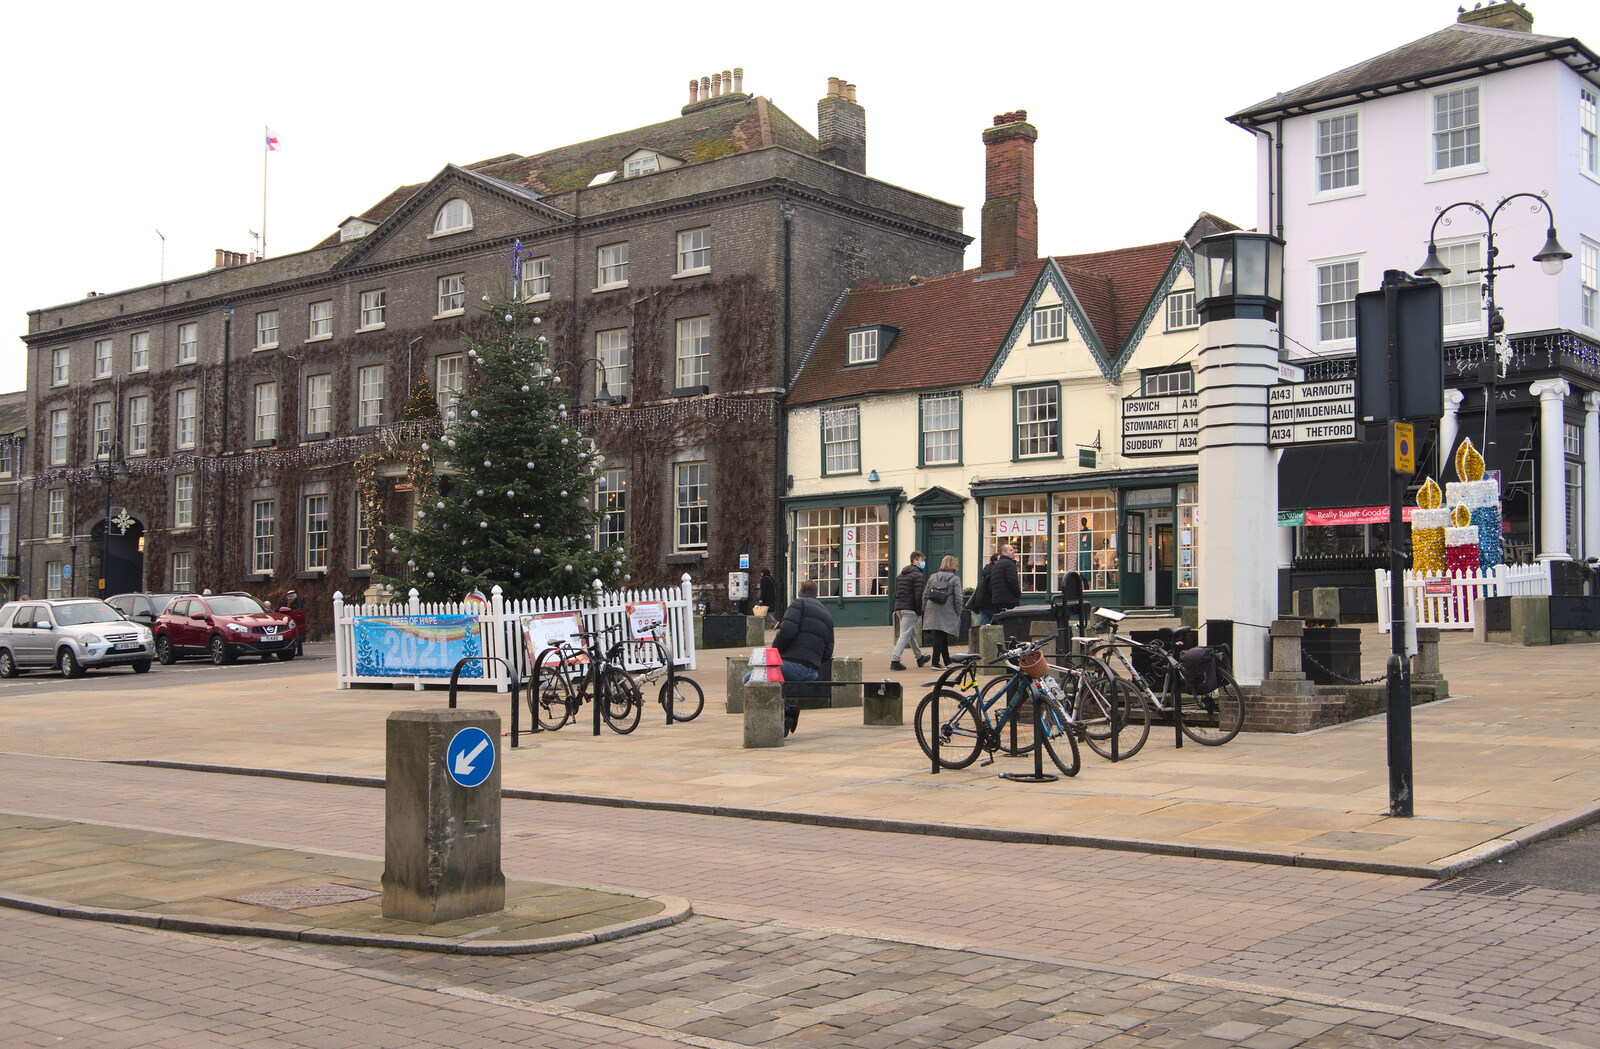 The Angel Hotel, where we stayed a while ago from A Few Hours in Bury St. Edmunds, Suffolk - 3rd January 2022